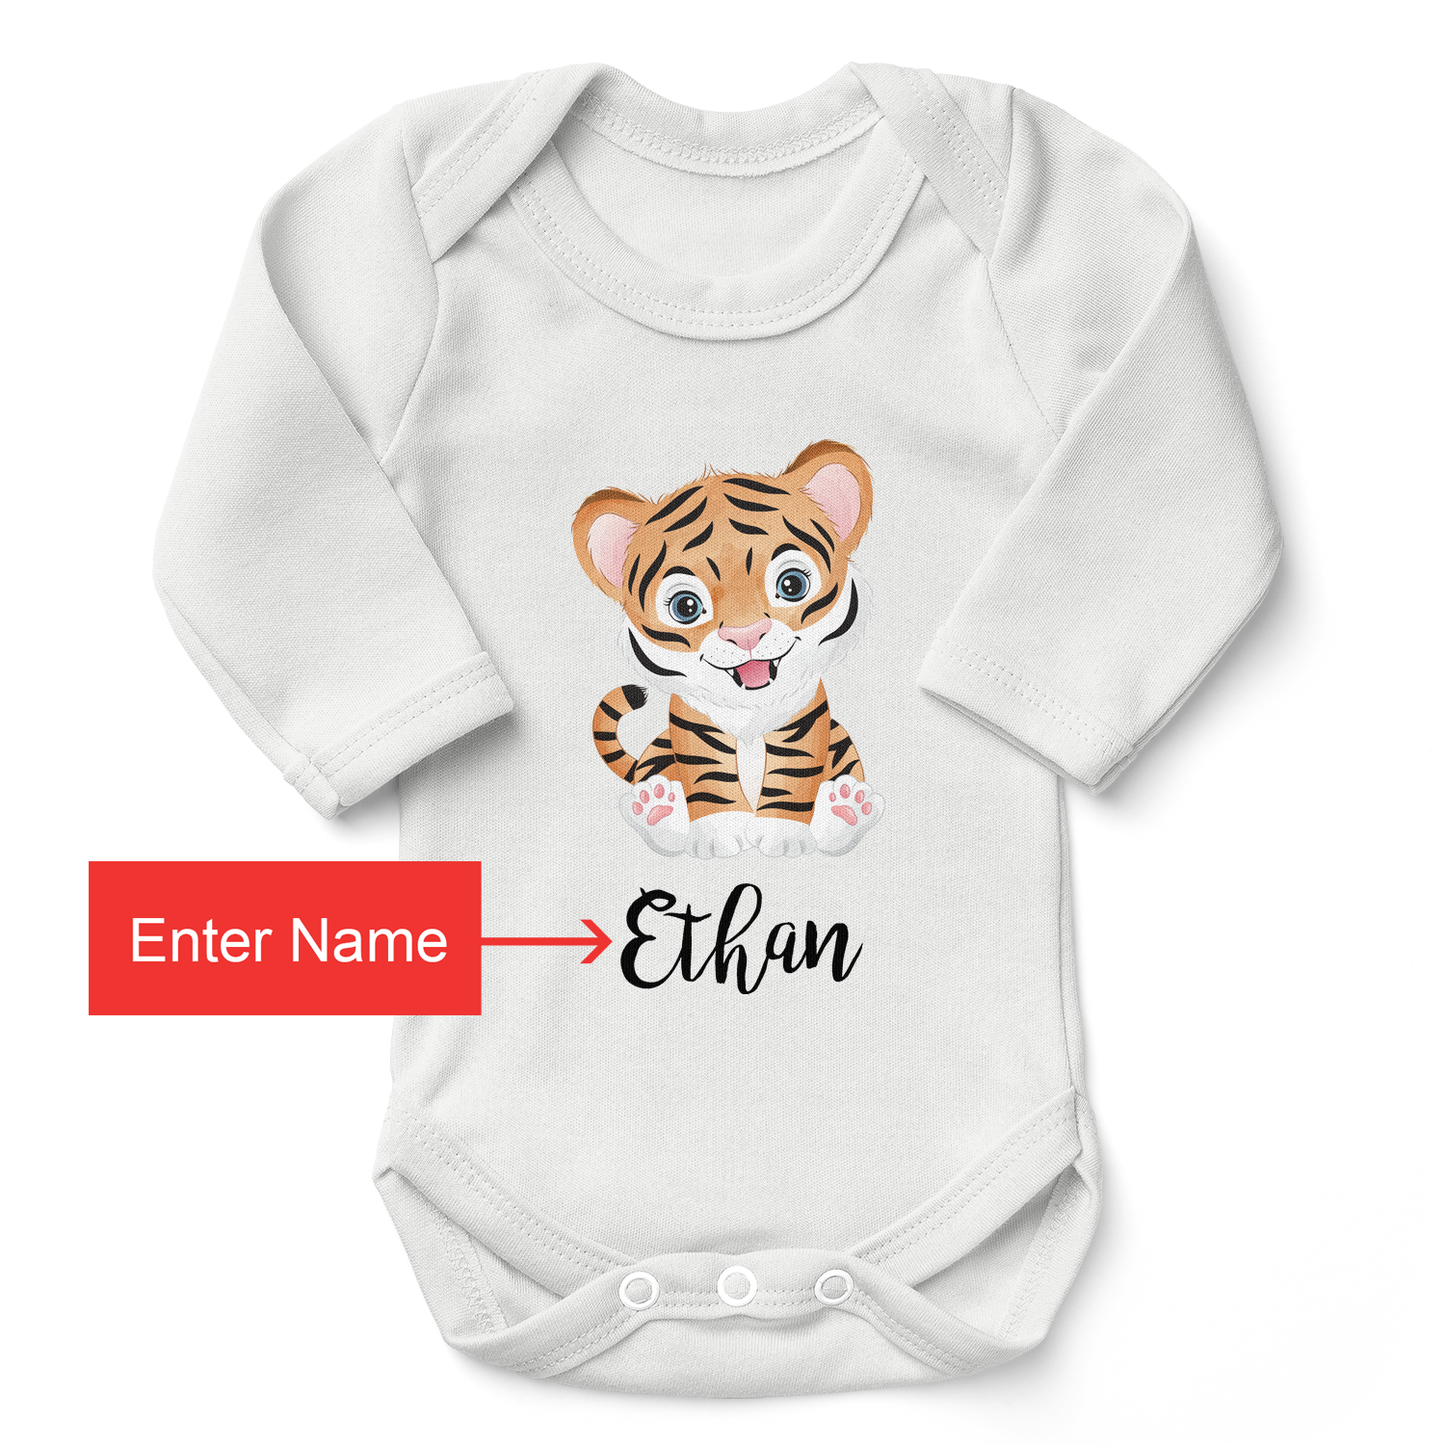 Personalized Matching Mom & Baby Organic Outfits - Happy Tiger Family (White)